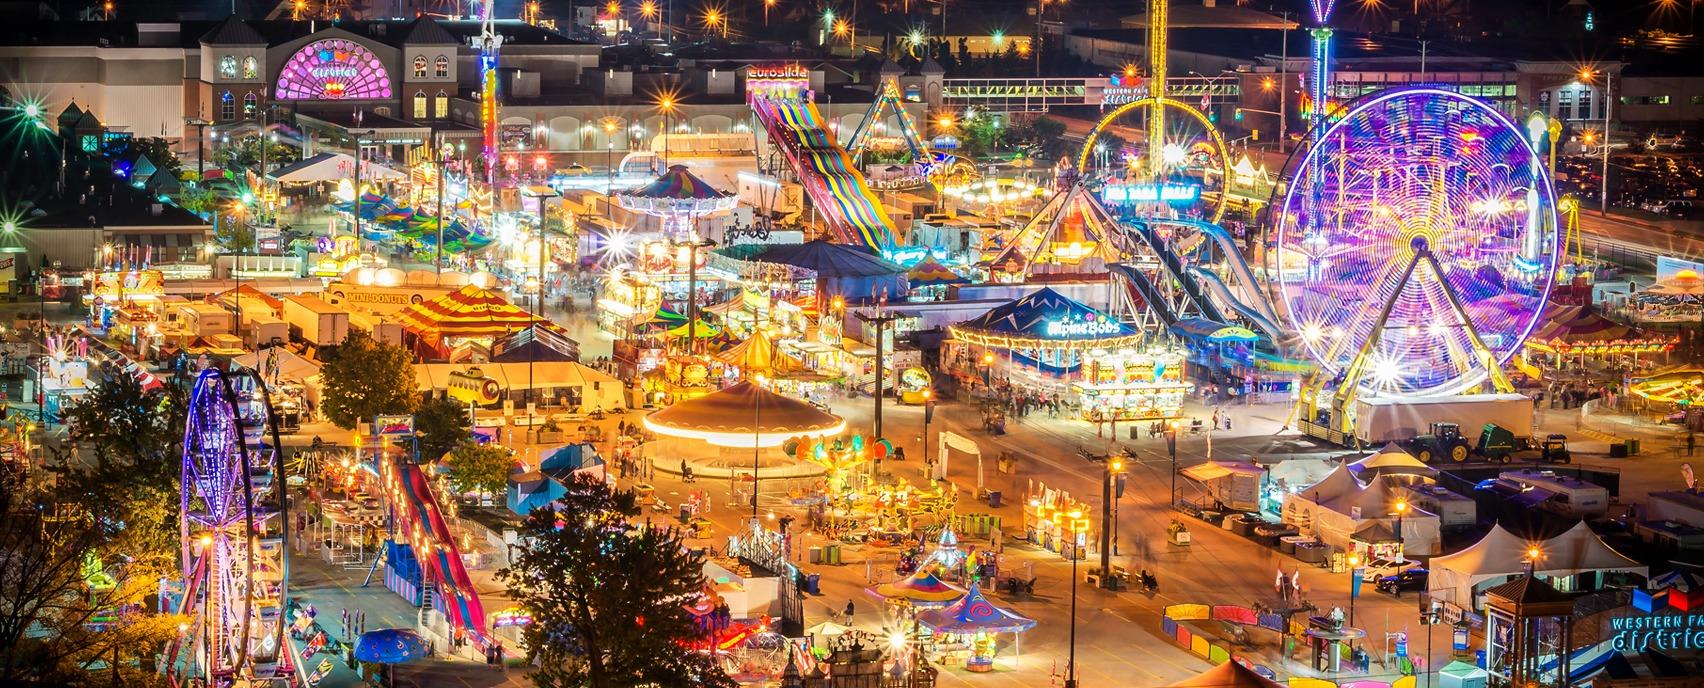 The fairgrounds of The Western Fair at night held in London, Ontario